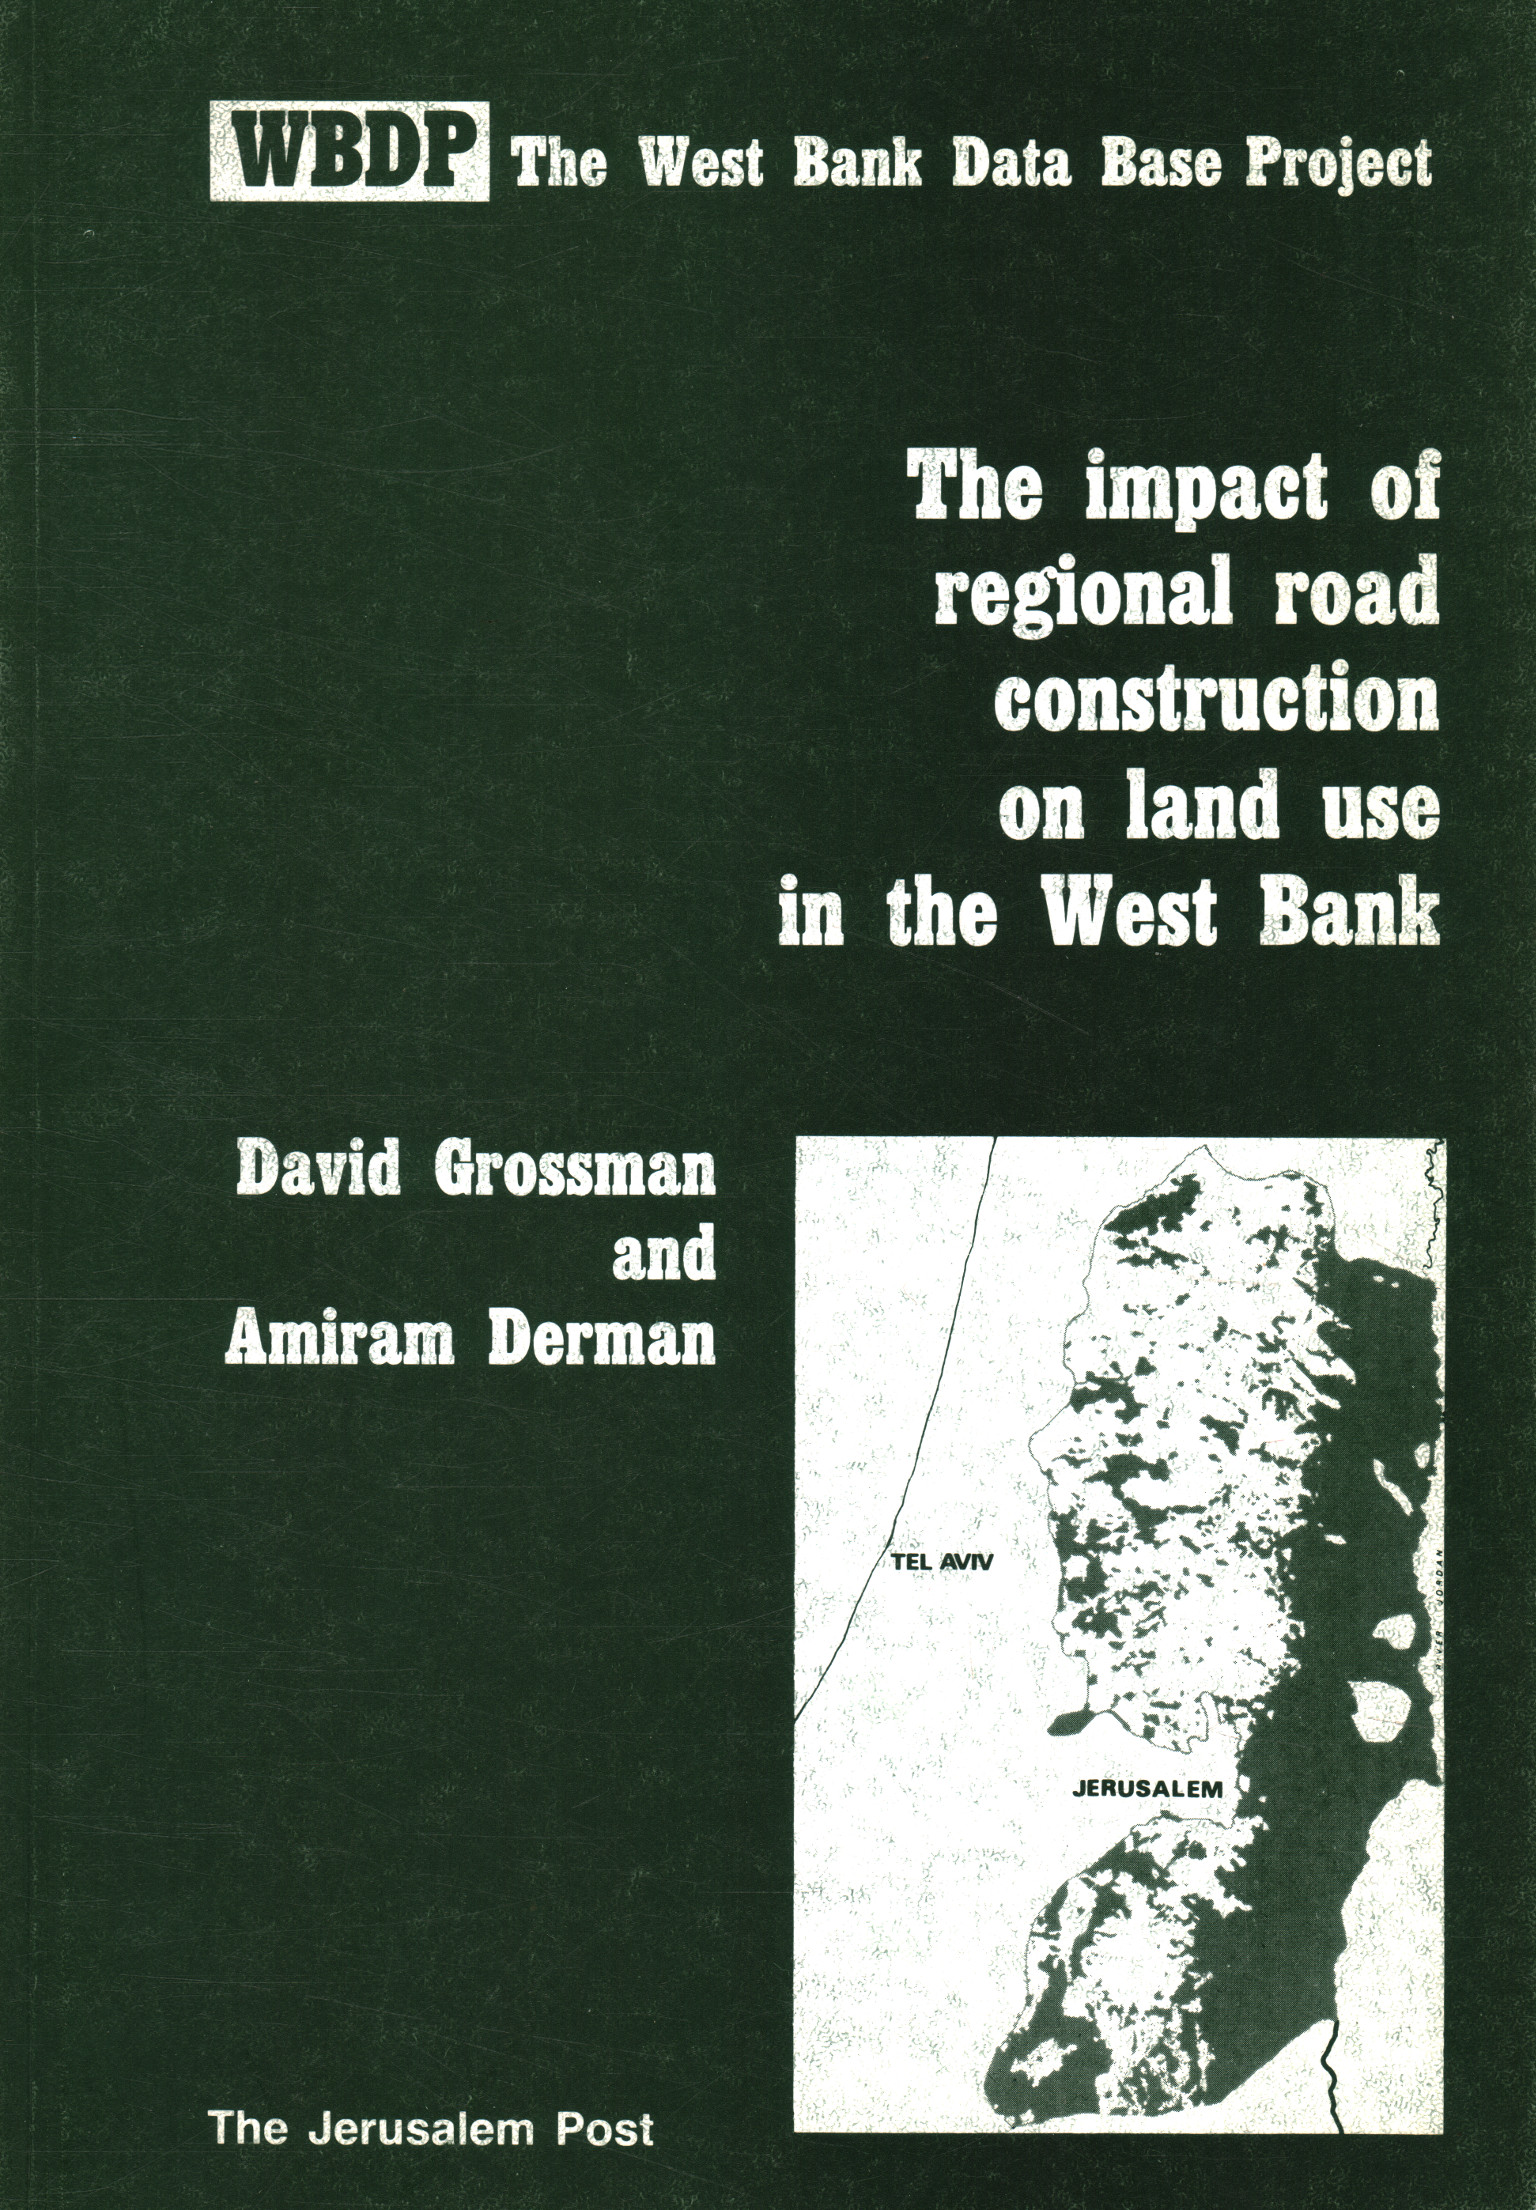 The impact of regional road construction